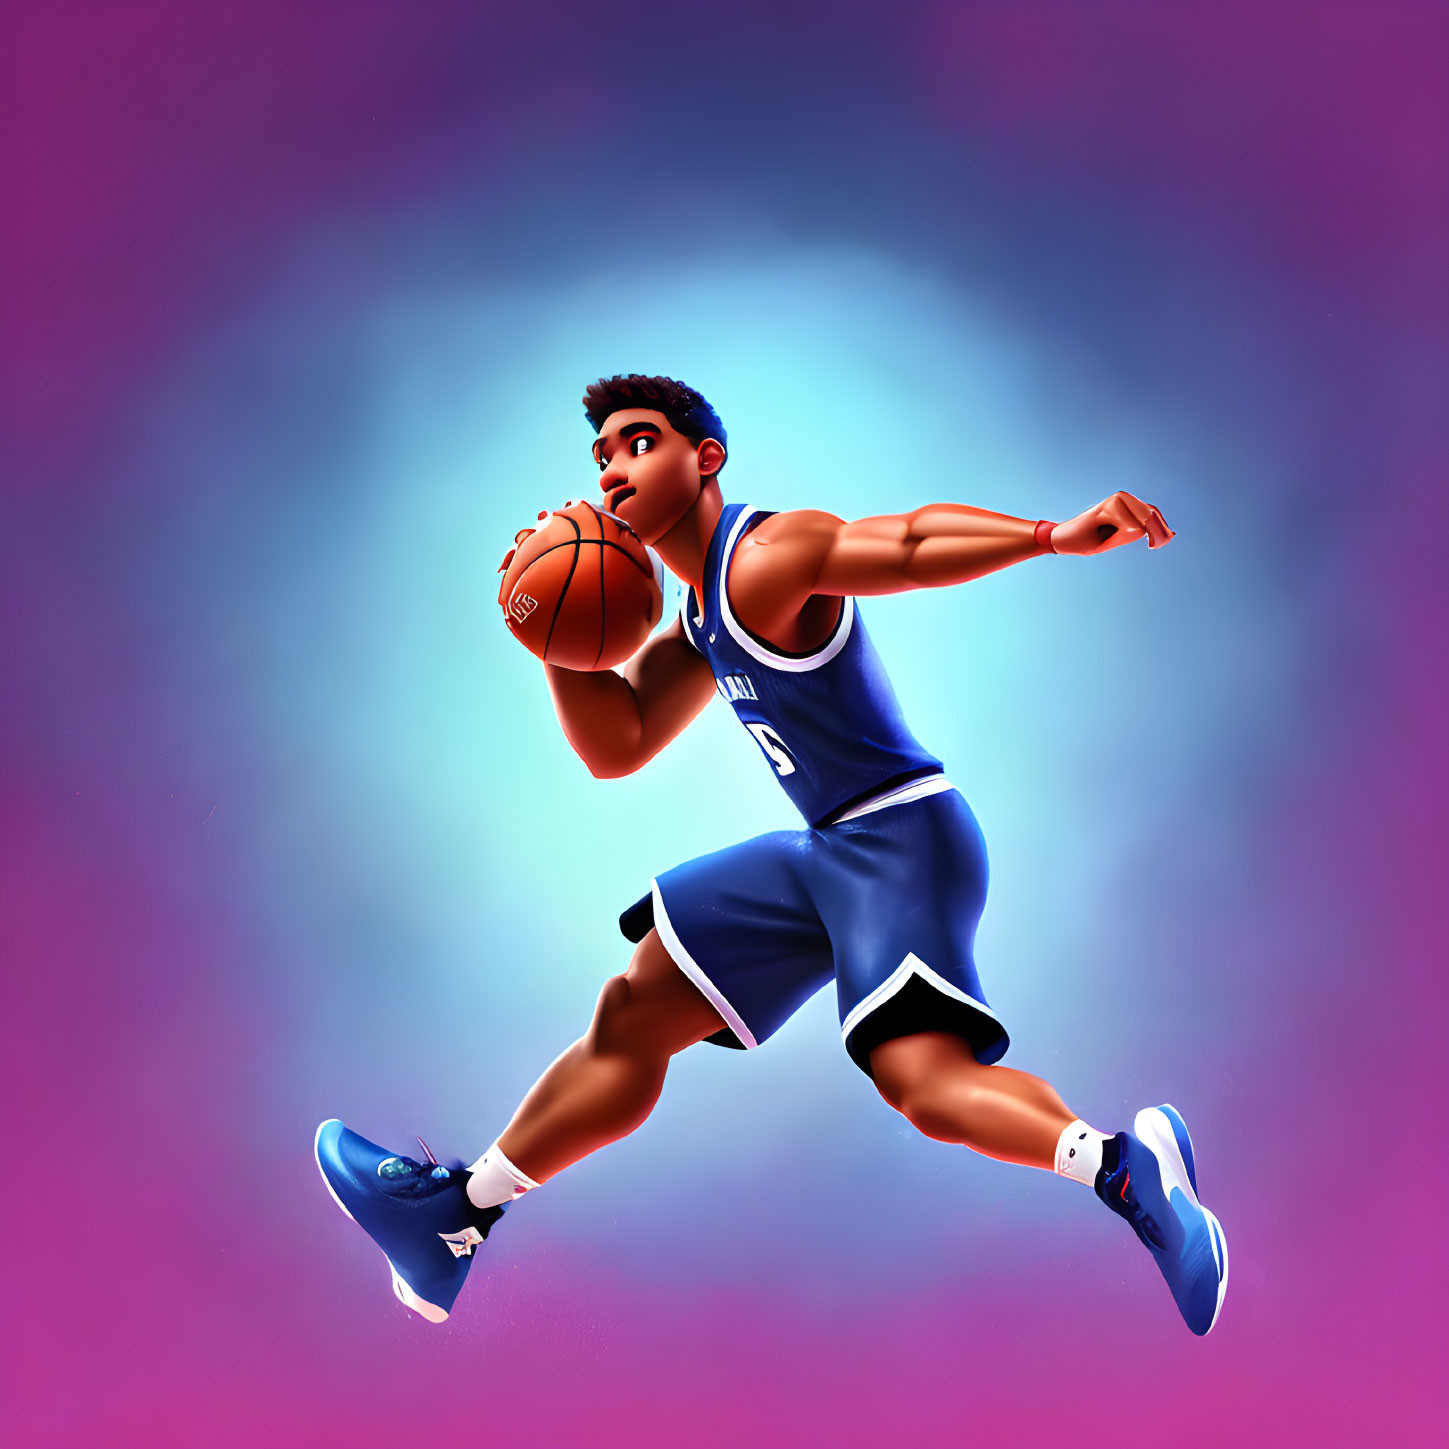 Colorful Basketball Player Dribbling in Blue Attire